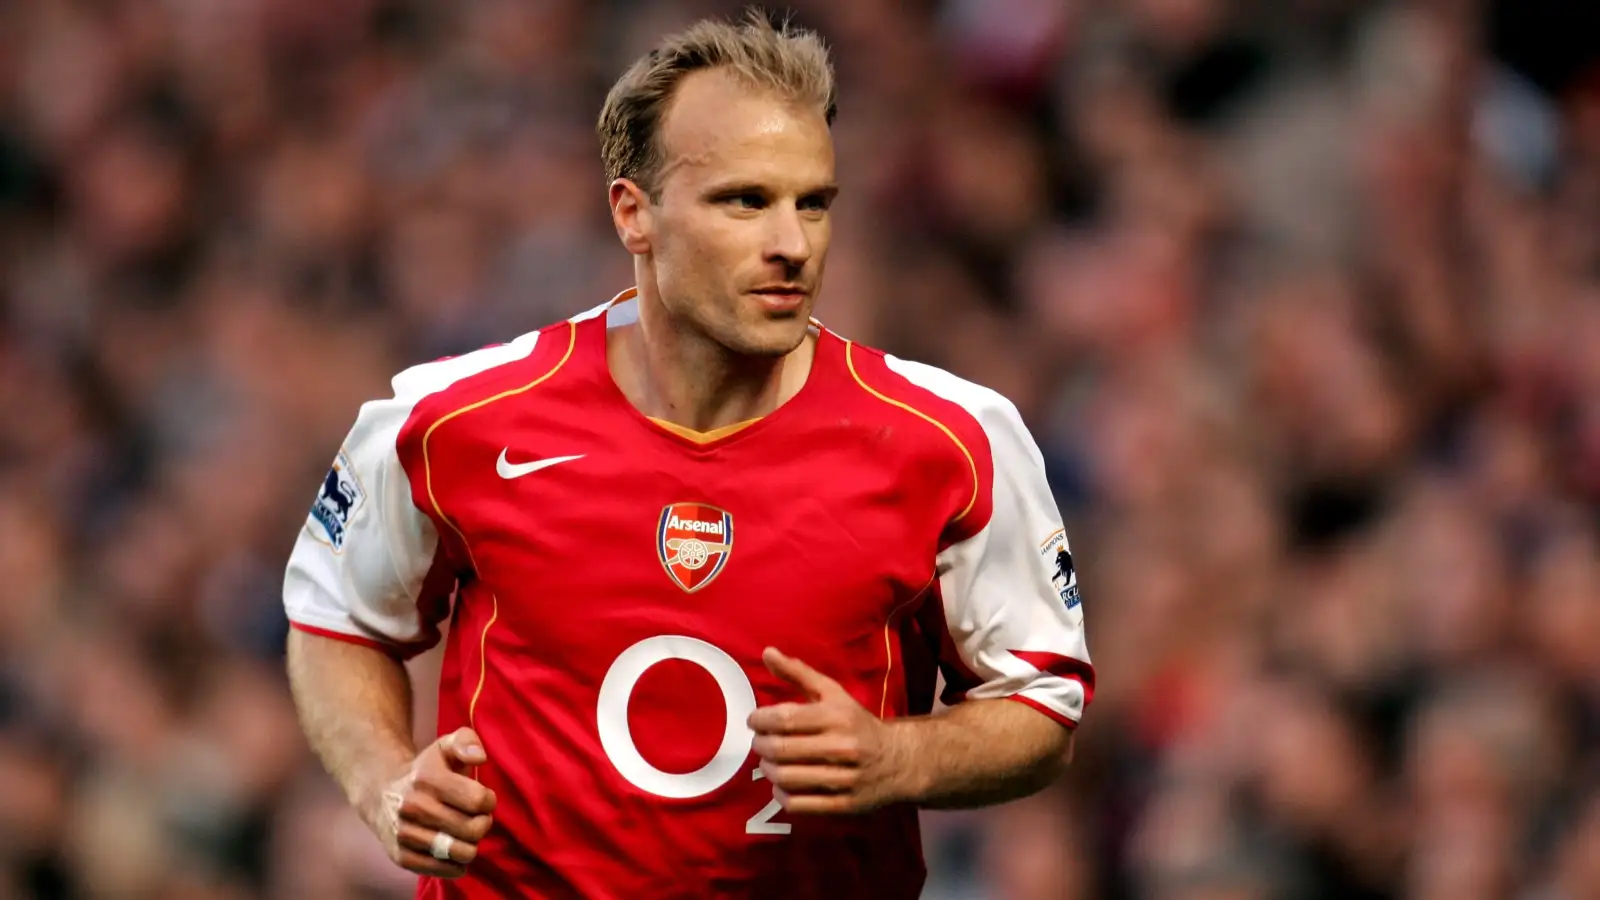 Timber next: Ranking the 7 Dutch players to play for Arsenal in the PL era